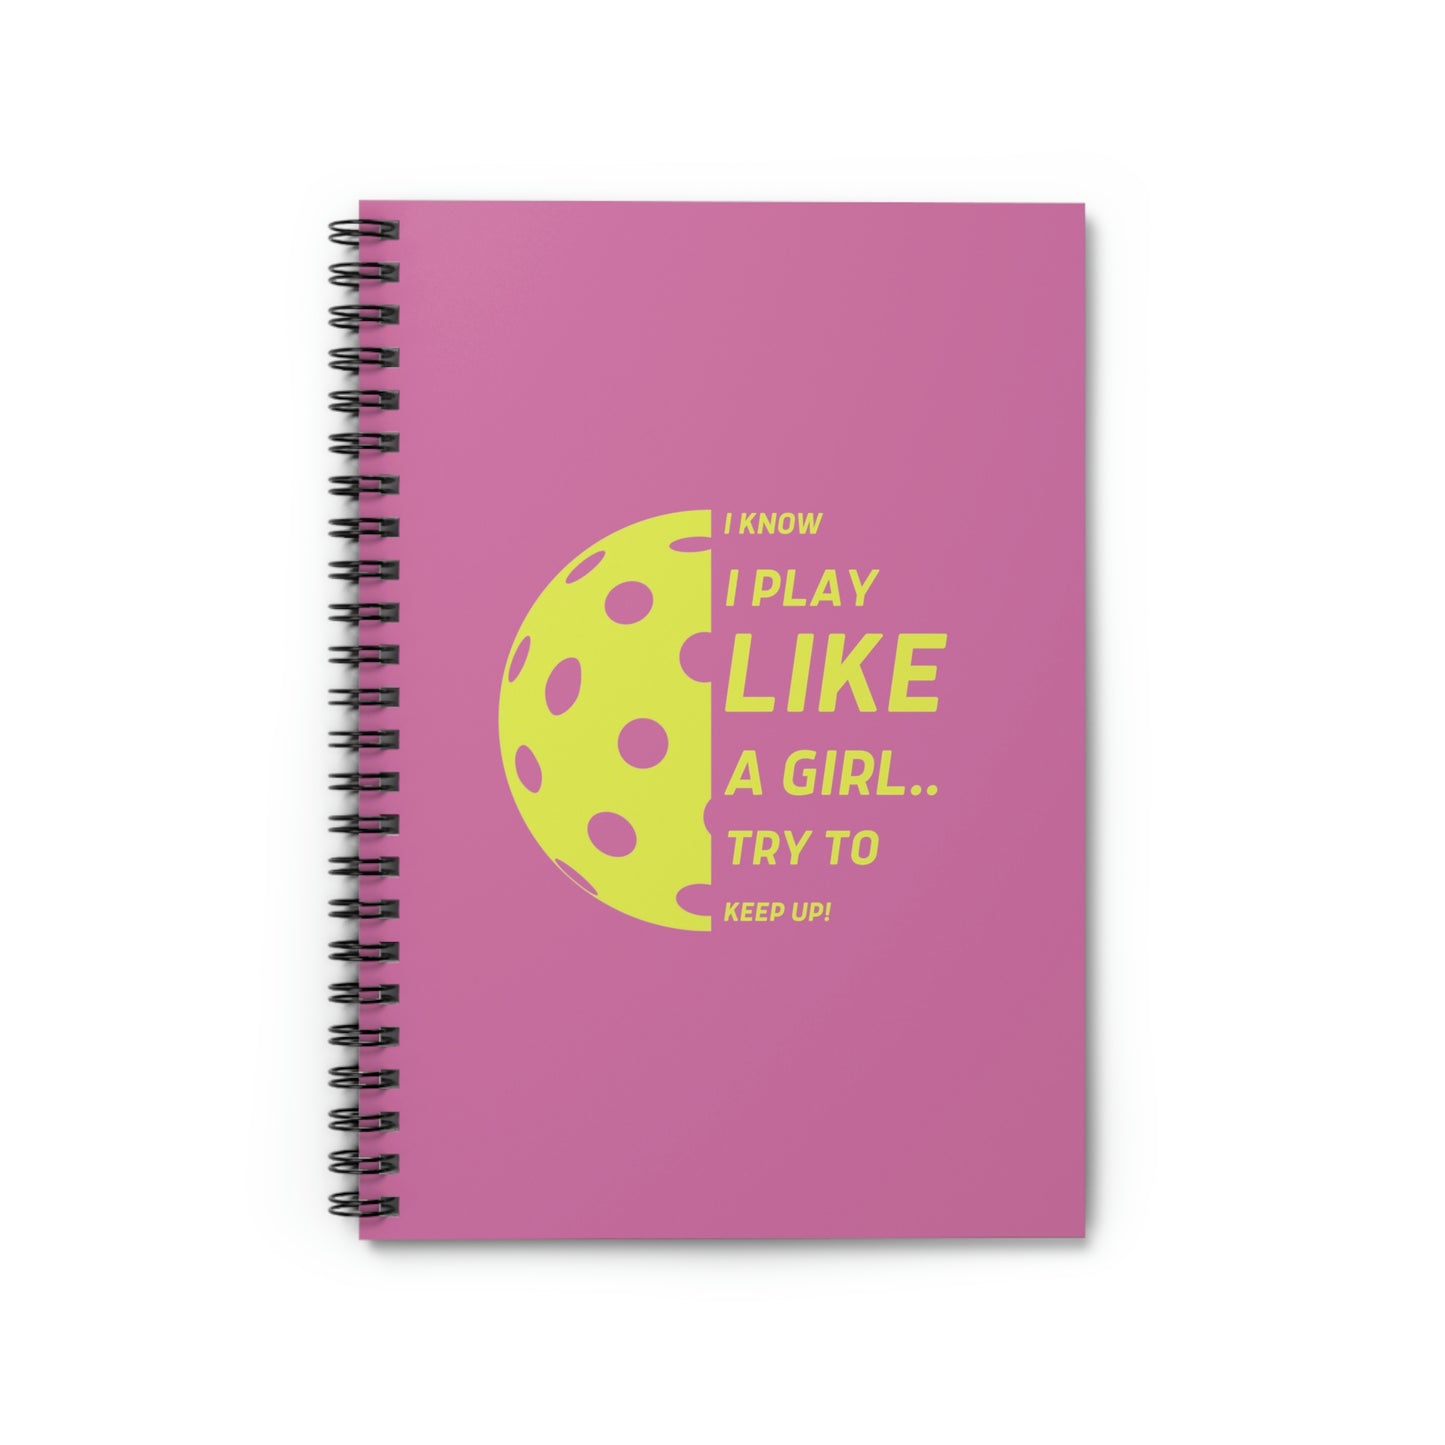 Spiral Notebook - Ruled Line  (Yellow Graphic)